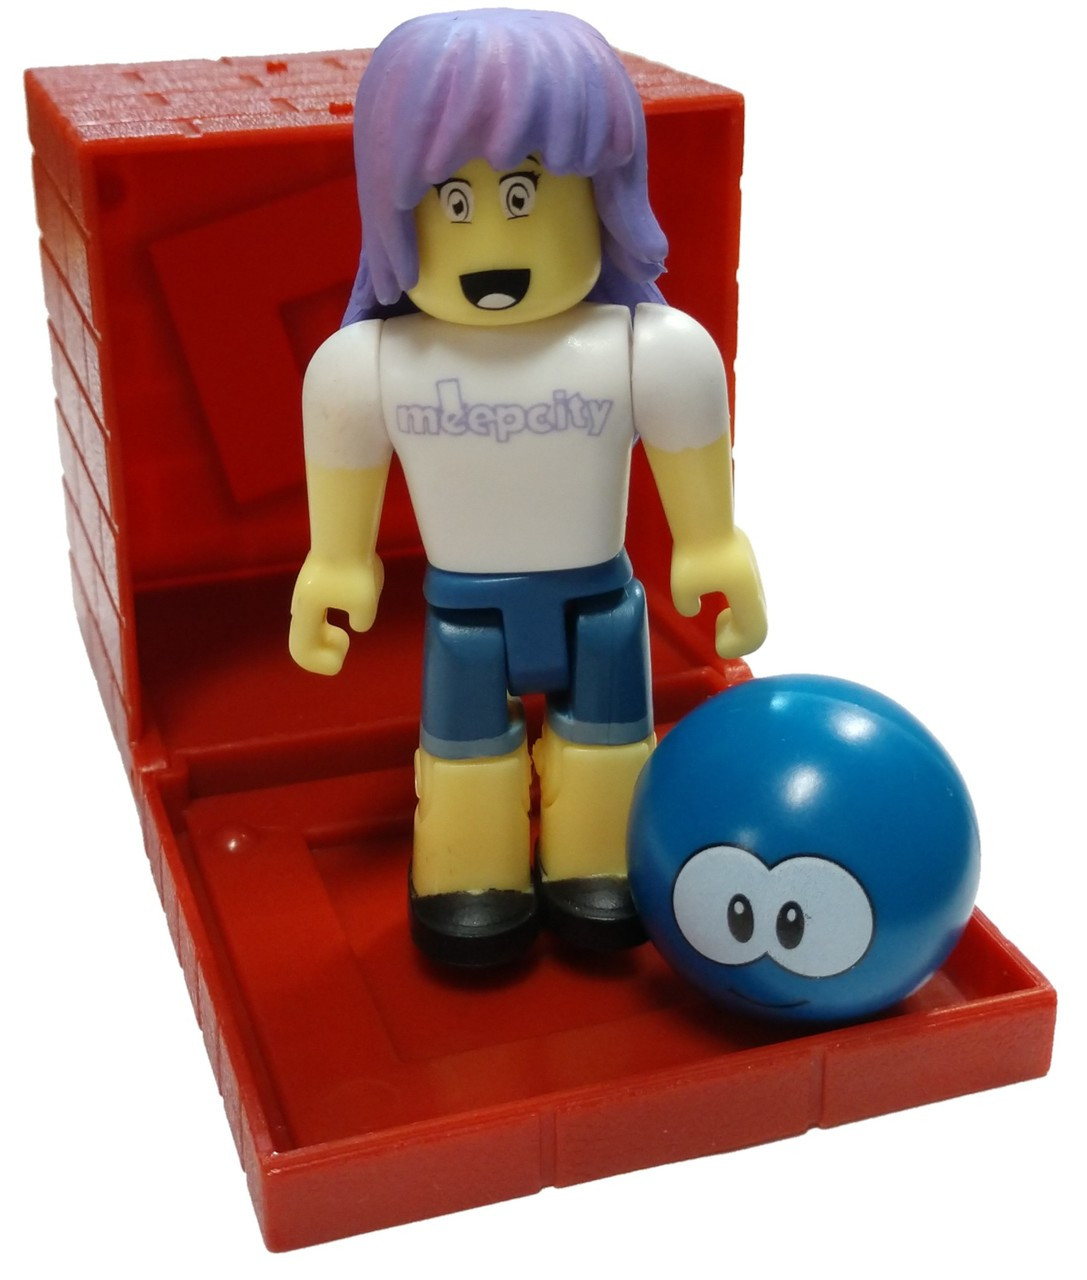 Roblox Red Series 4 Meepcity Pet Seller 3 Mini Figure With Red Cube And Online Code Loose Jazwares Toywiz - roblox meepcity code